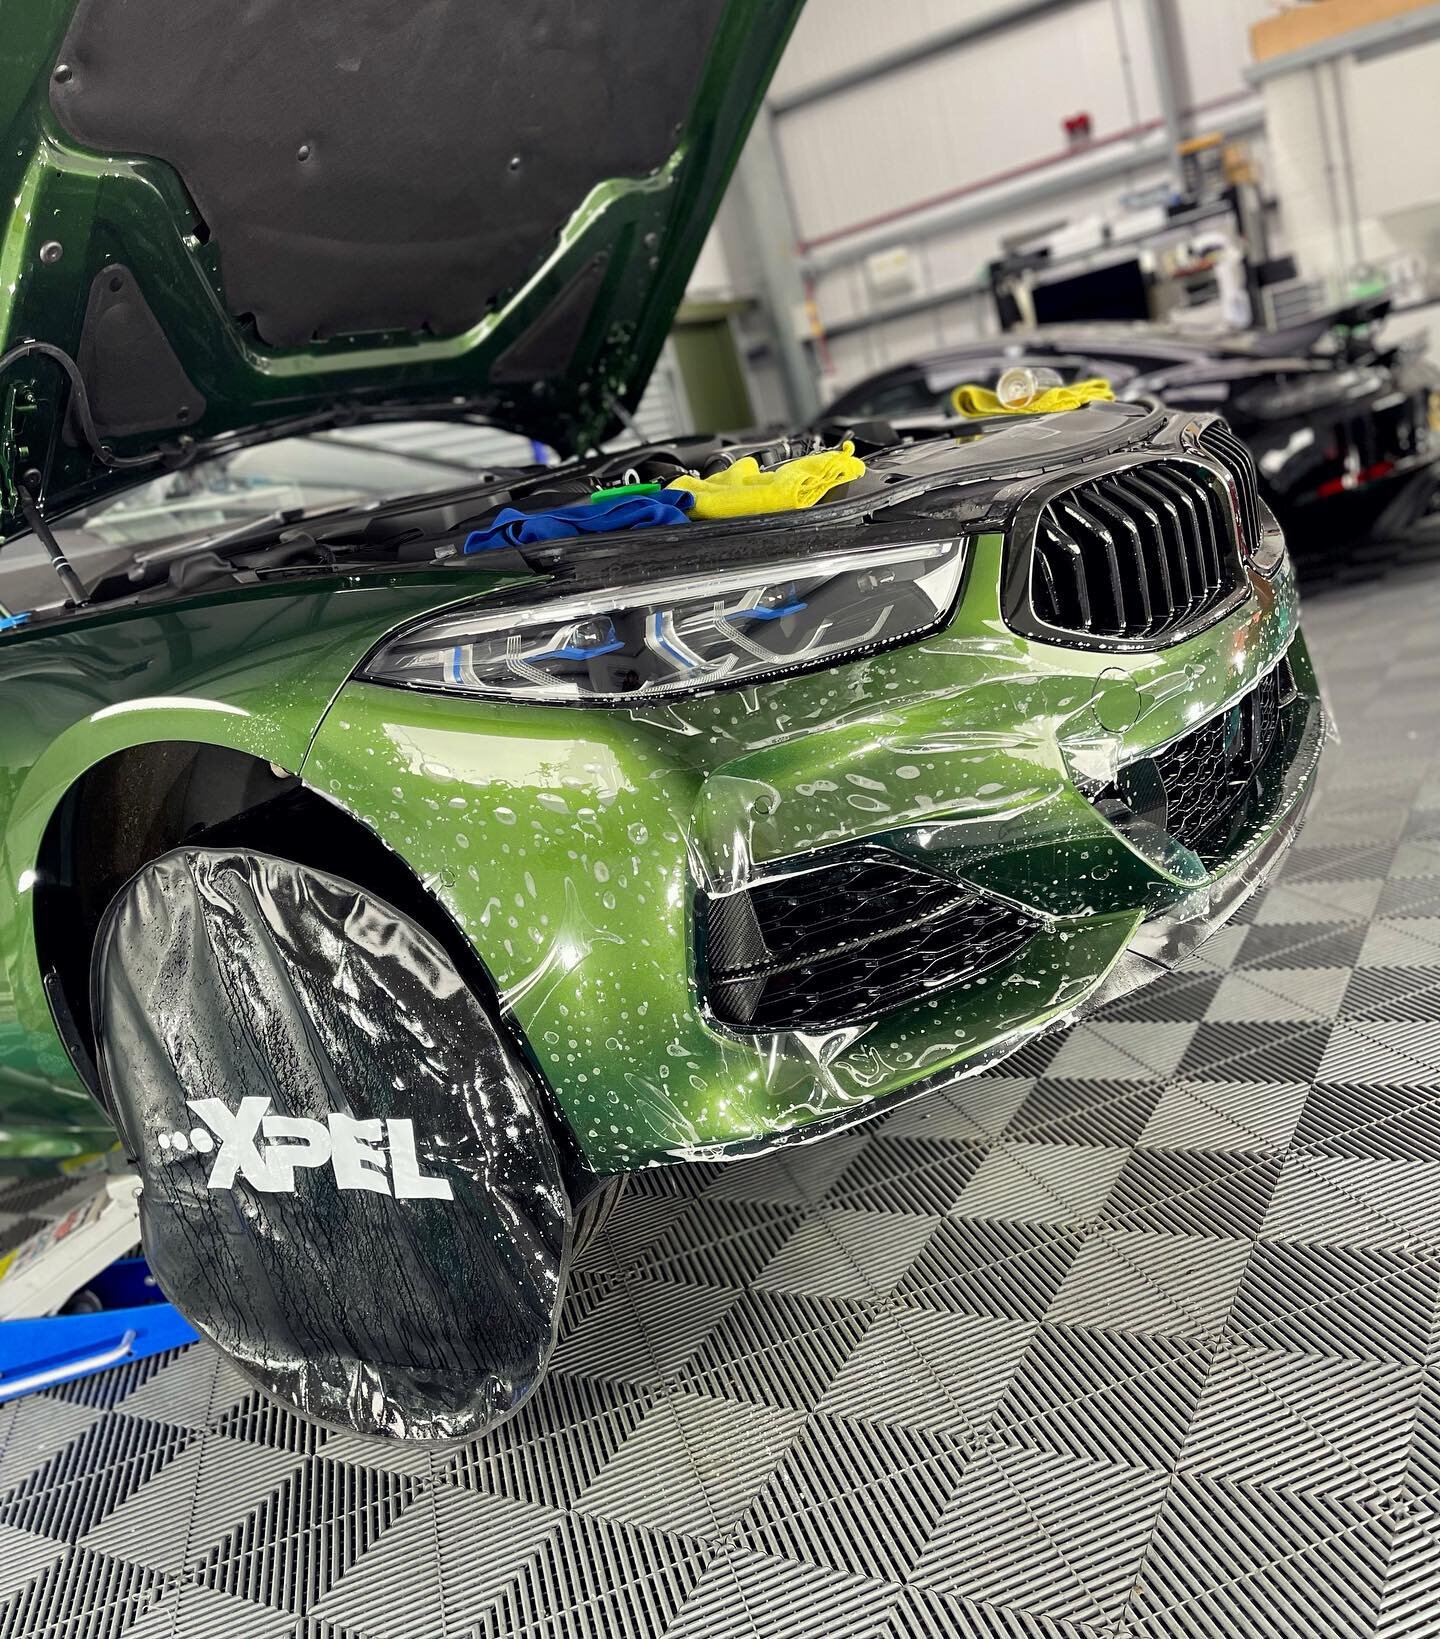 We recently protected this entire BMW M850i Cabriolet with @xpel_uk Ultimate Plus Paint Protection Film 🟡⚫️

#bmw #bmwm850i #xpel #xpeluk #xpelppf #paintprotectionfilm #ppfinstaller #mpower #green #makegreengreatagain #luxurycars #manchester #cheshi